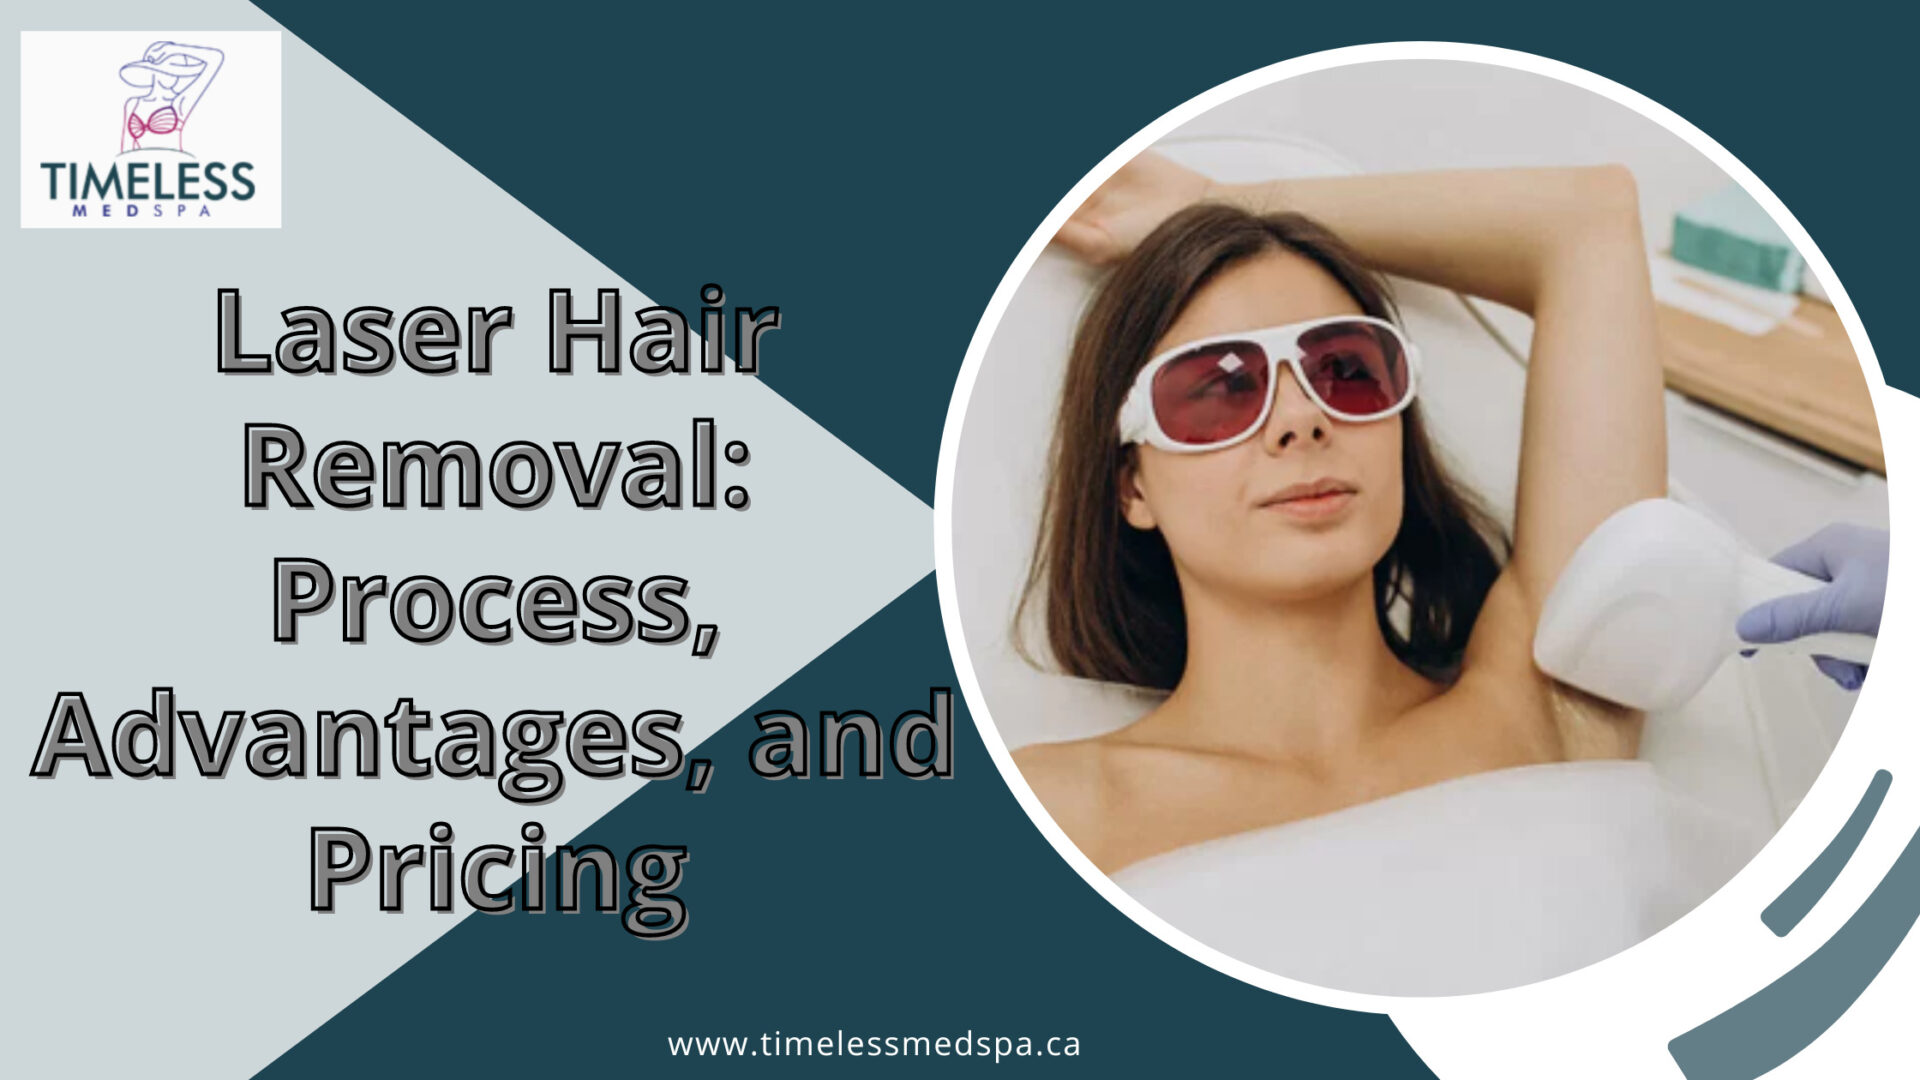 Laser Hair Removal: Process, Advantages, and Pricing